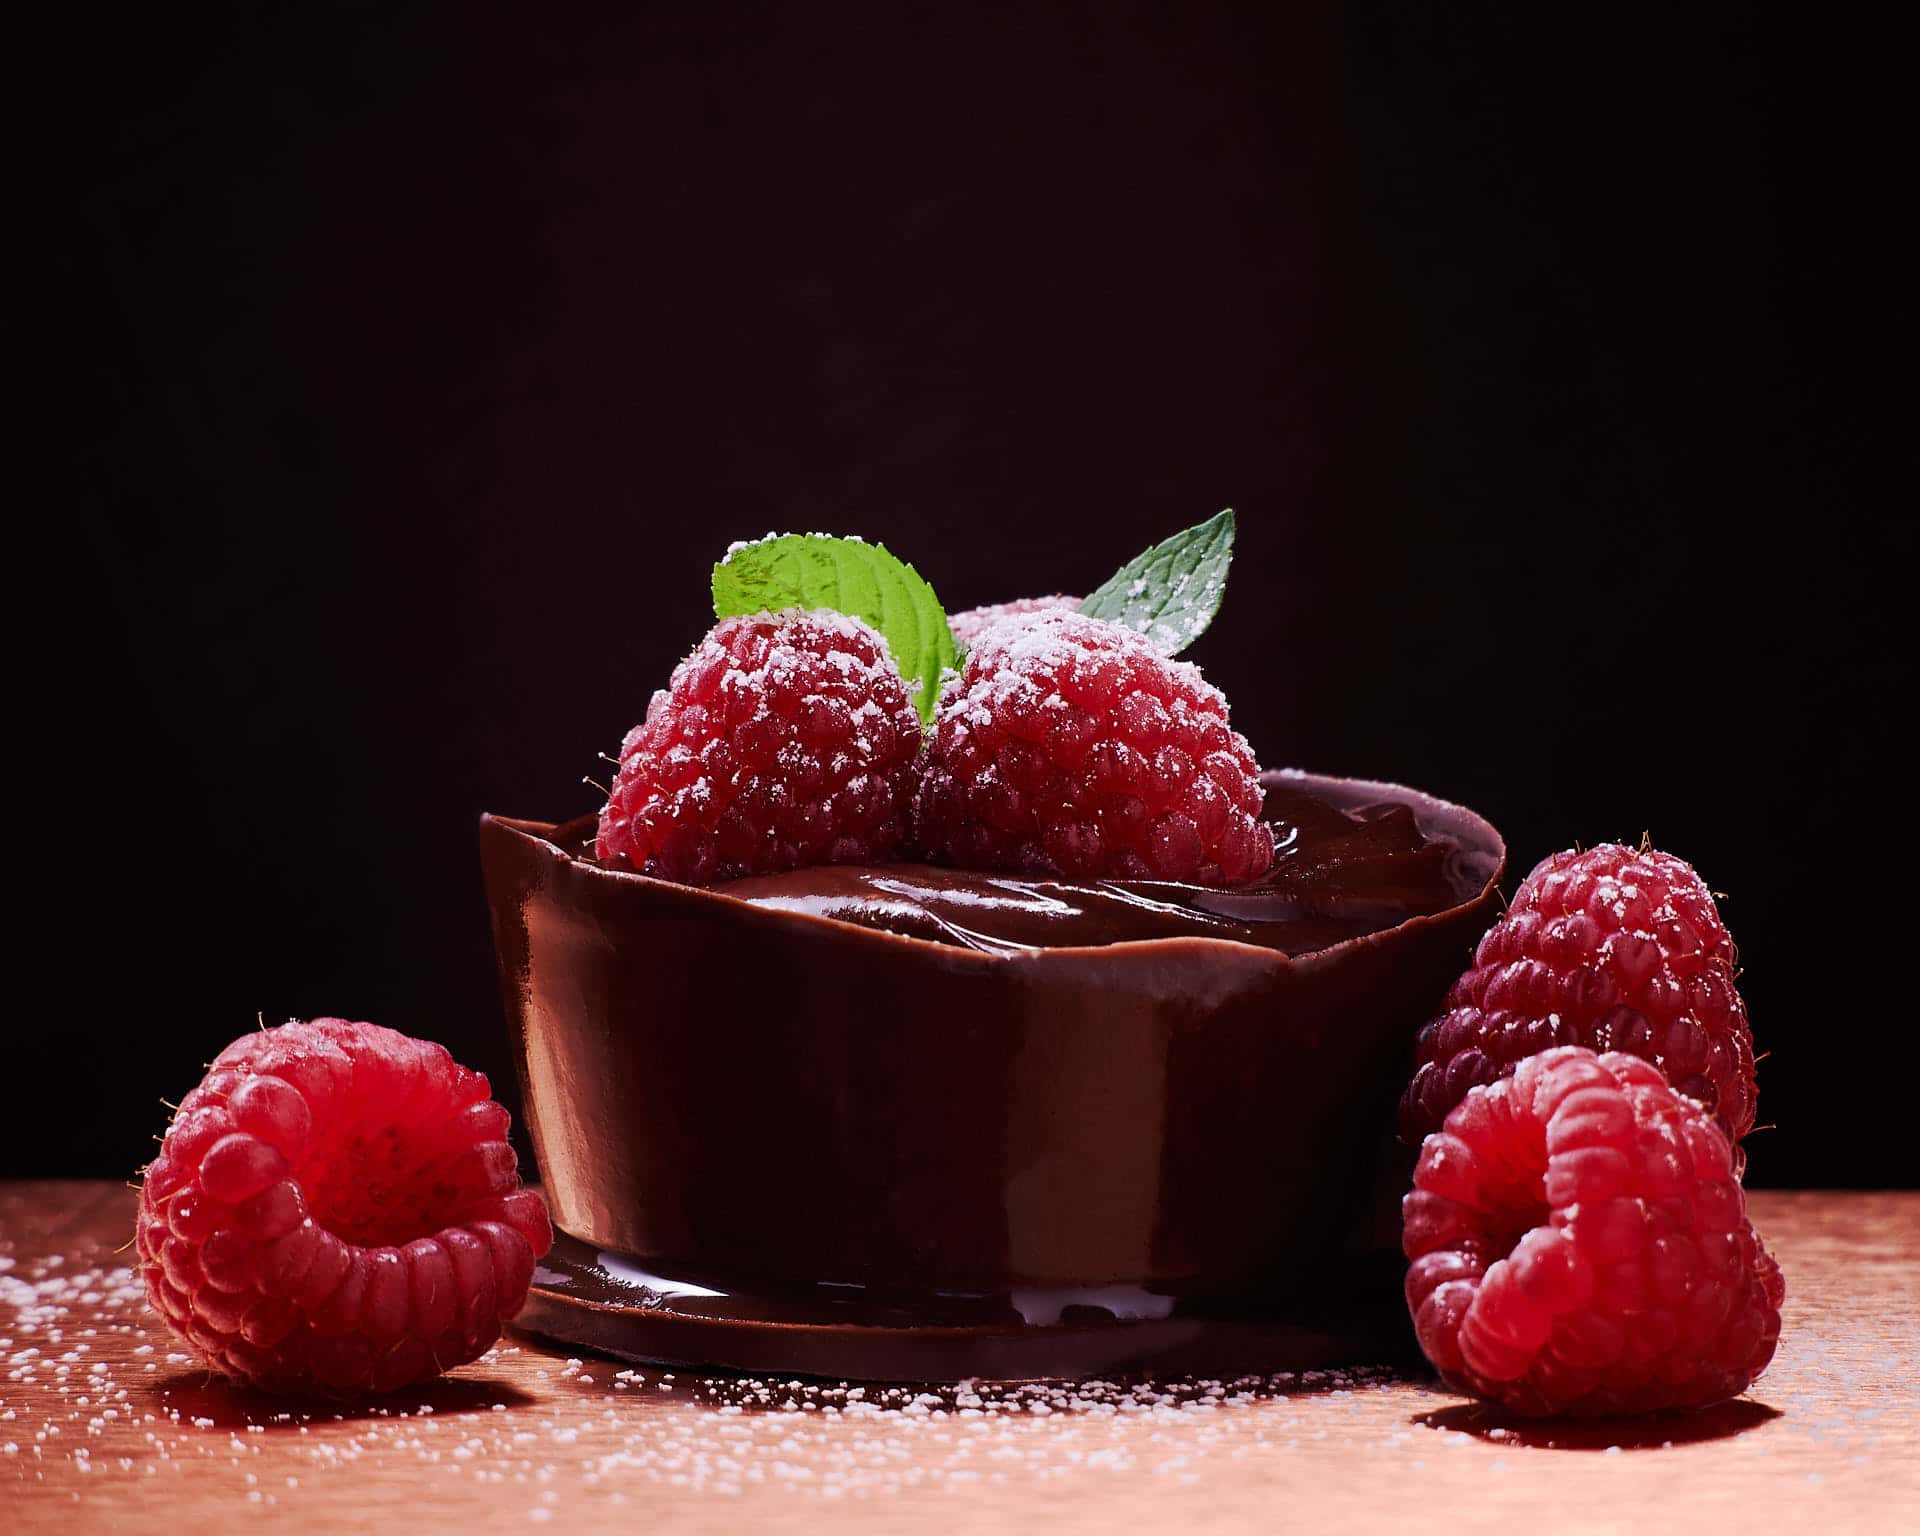 Chocolate pudding in a cup with raspberries